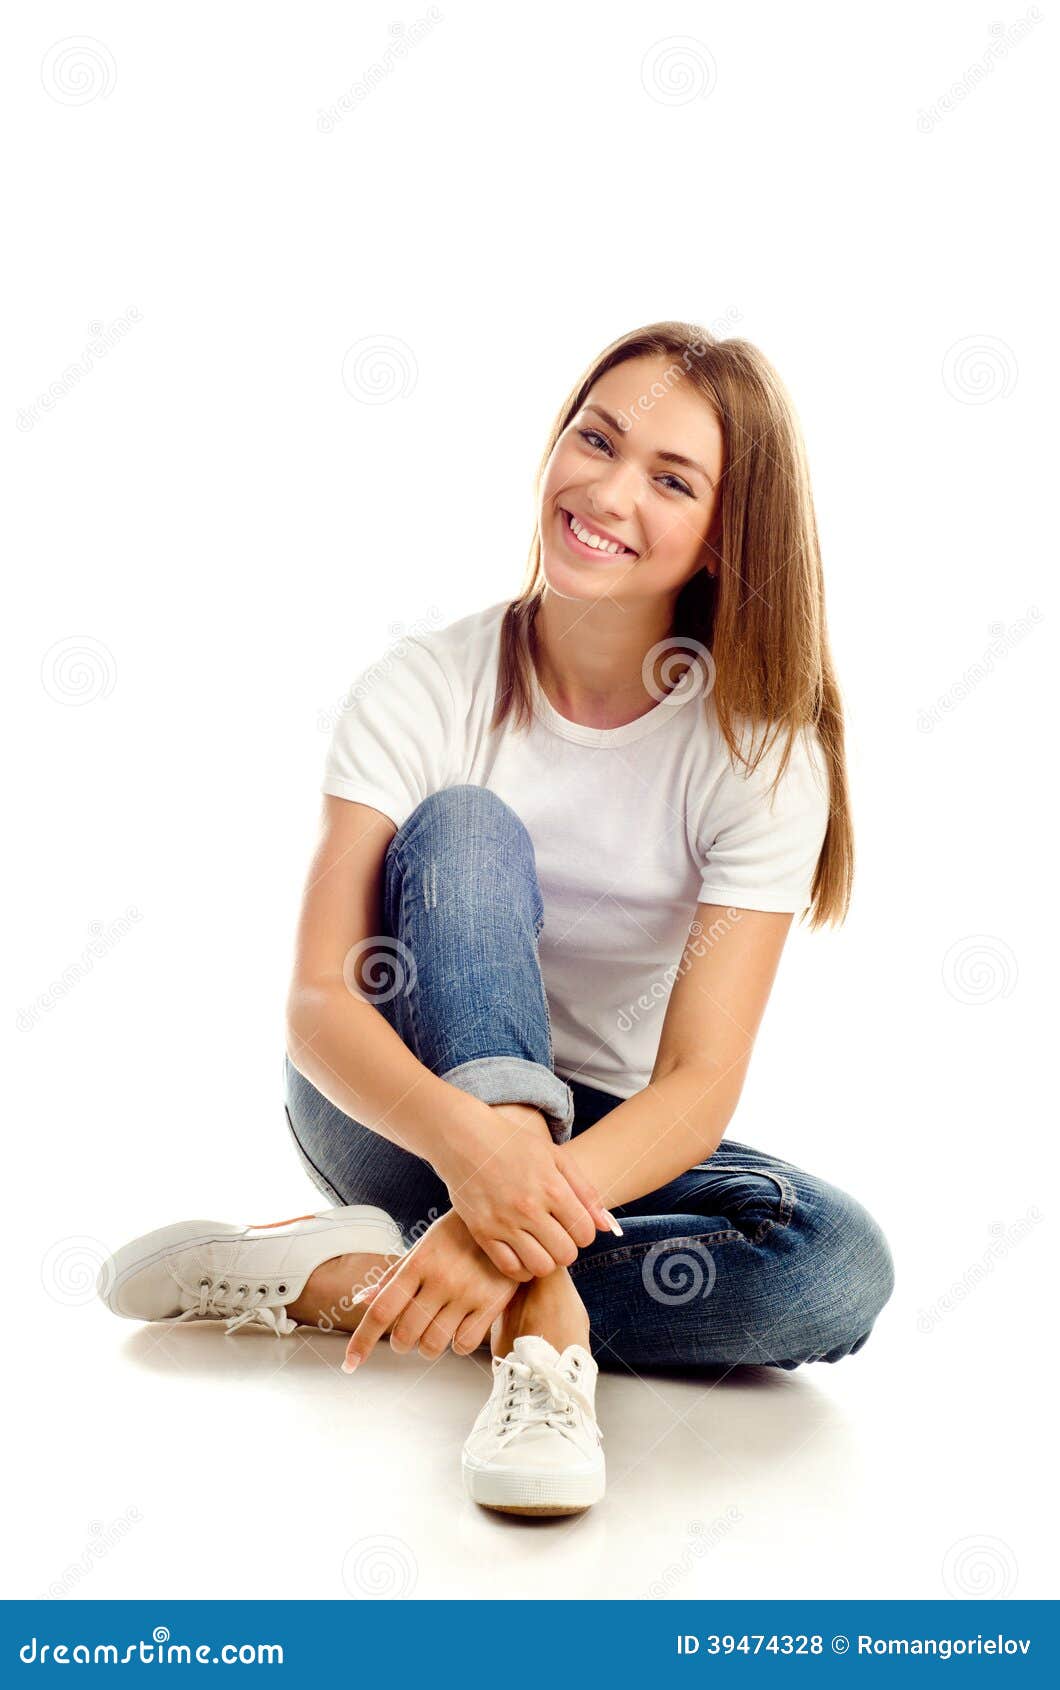 Young girl stock photo. Image of tshirt, student, person - 39474328